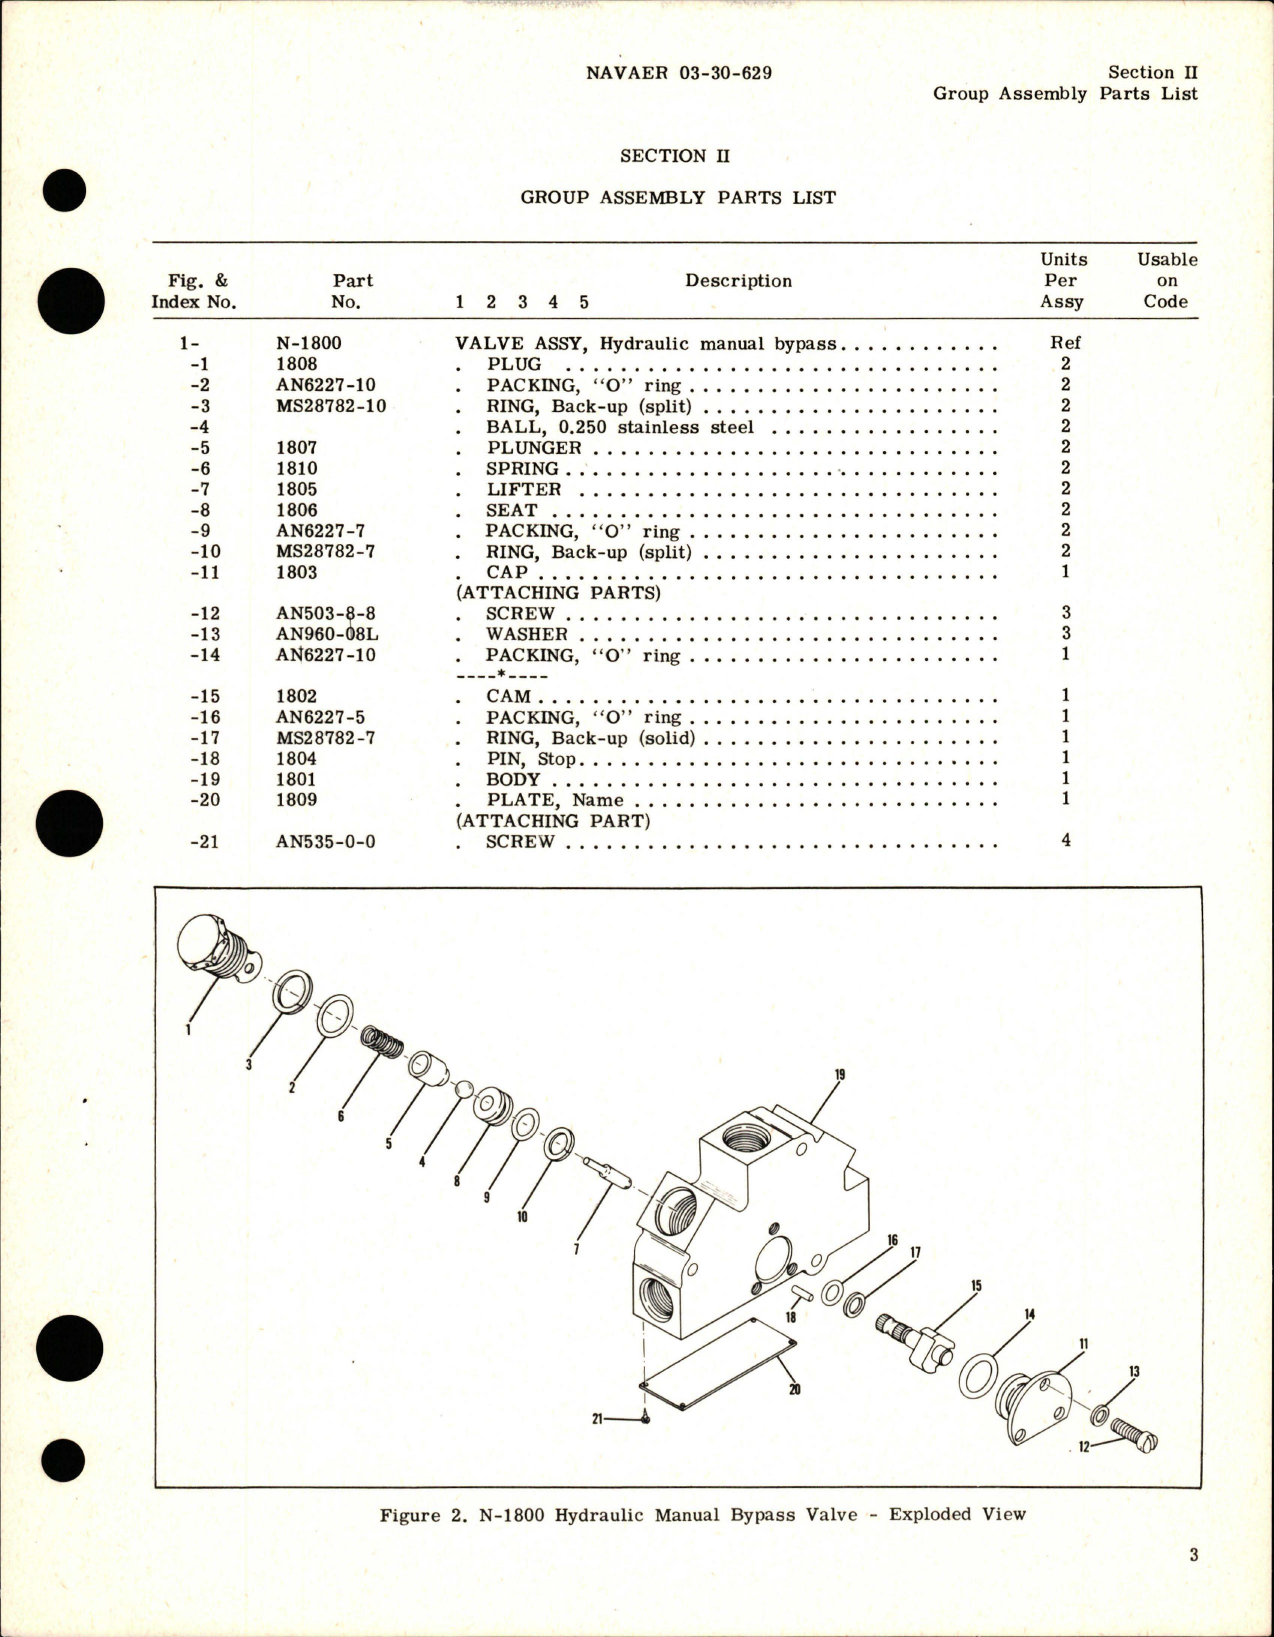 Sample page 5 from AirCorps Library document: Illustrated Parts Breakdown for Hydraulic Manual Bypass Valve - Part N-1800 